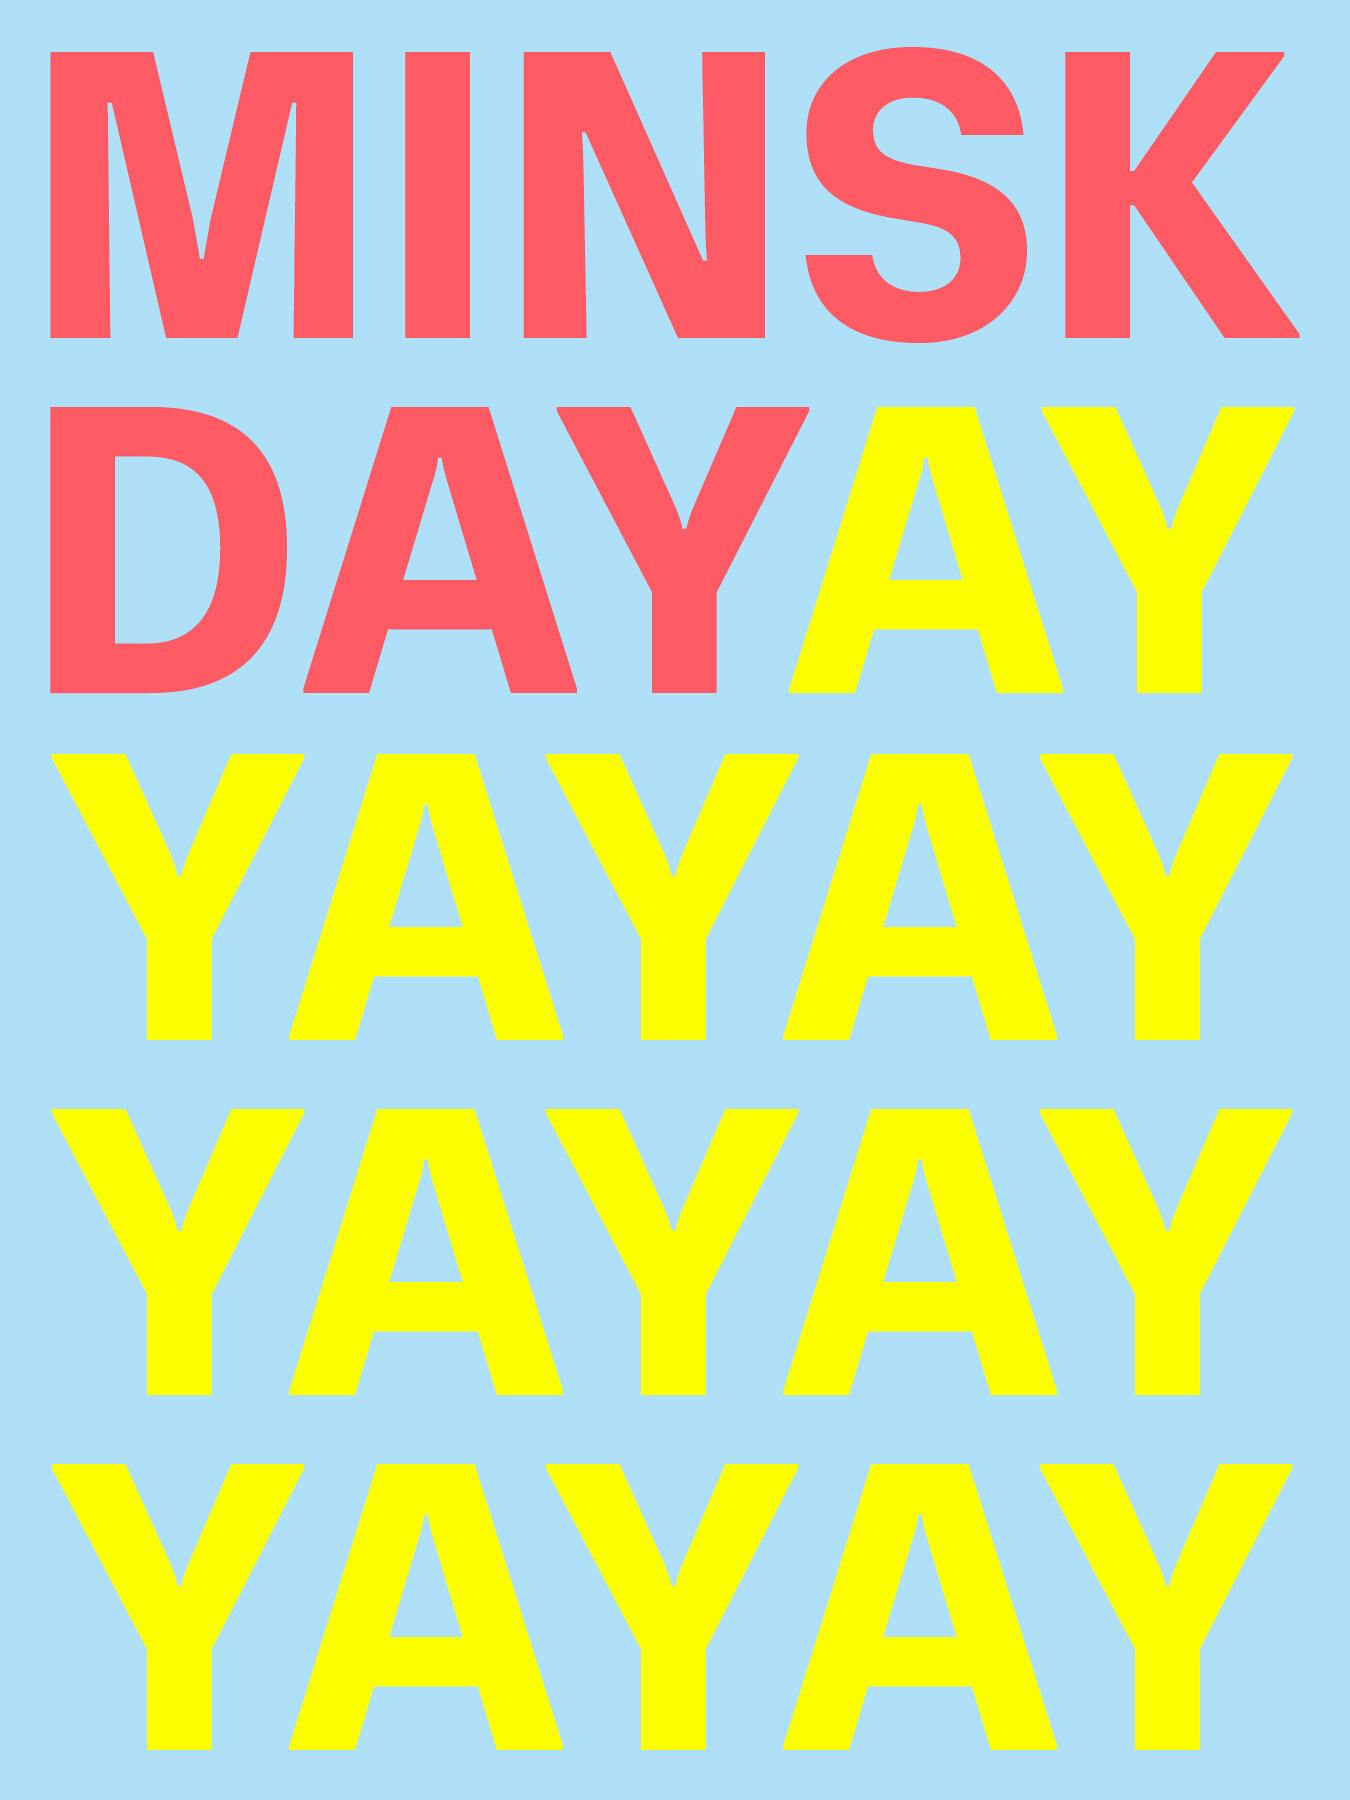 Graphic with the words MINSKDAY, YAY YAY YAY, in bright and gaudy colors.